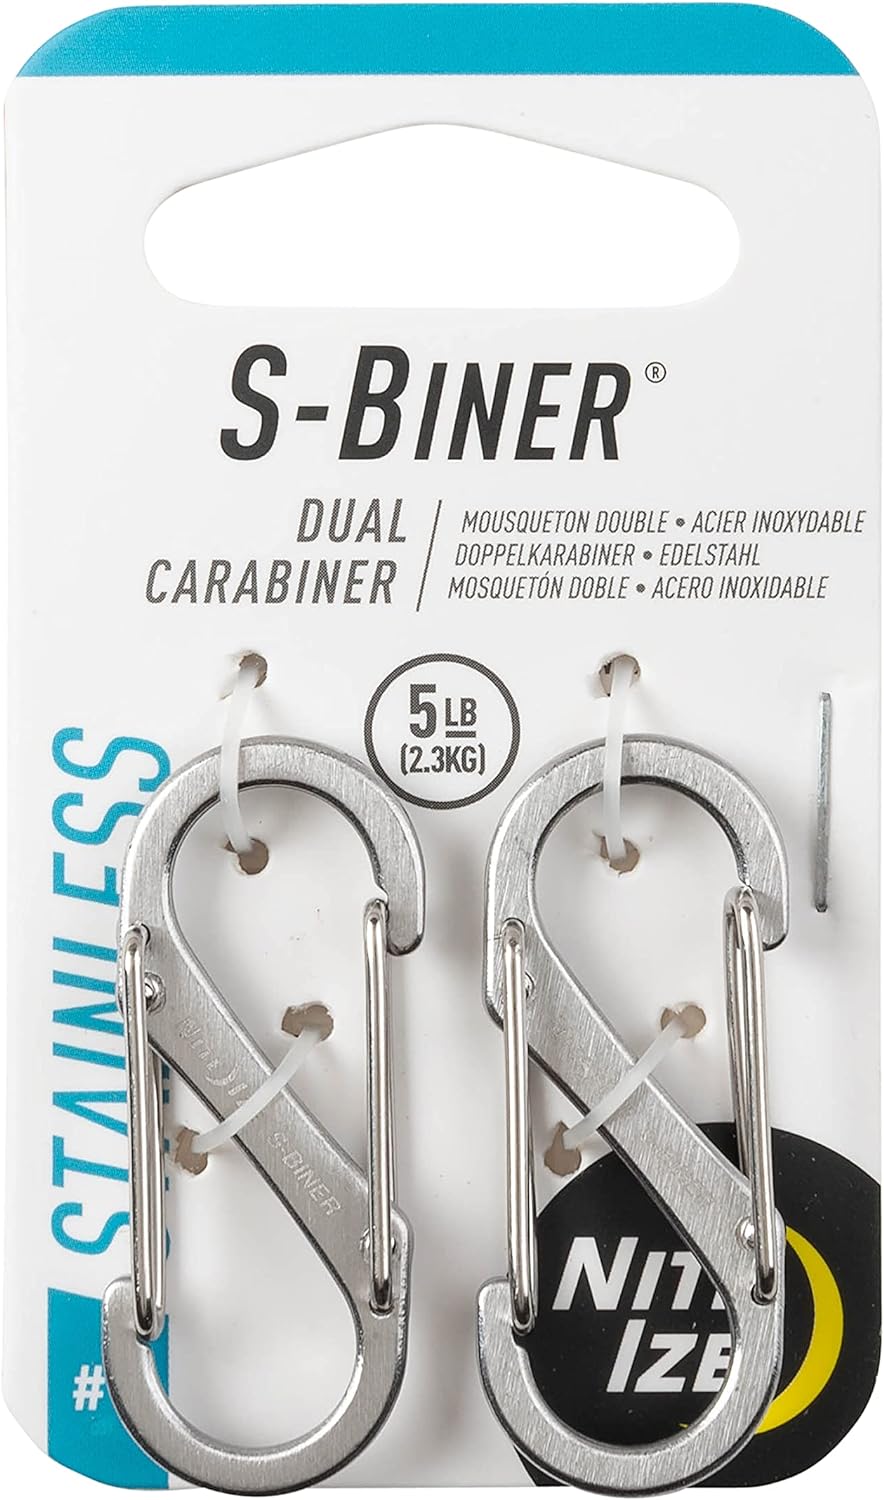 S-Biner® Stainless Steel Double Gated Carabiner #1 - 2 Pack